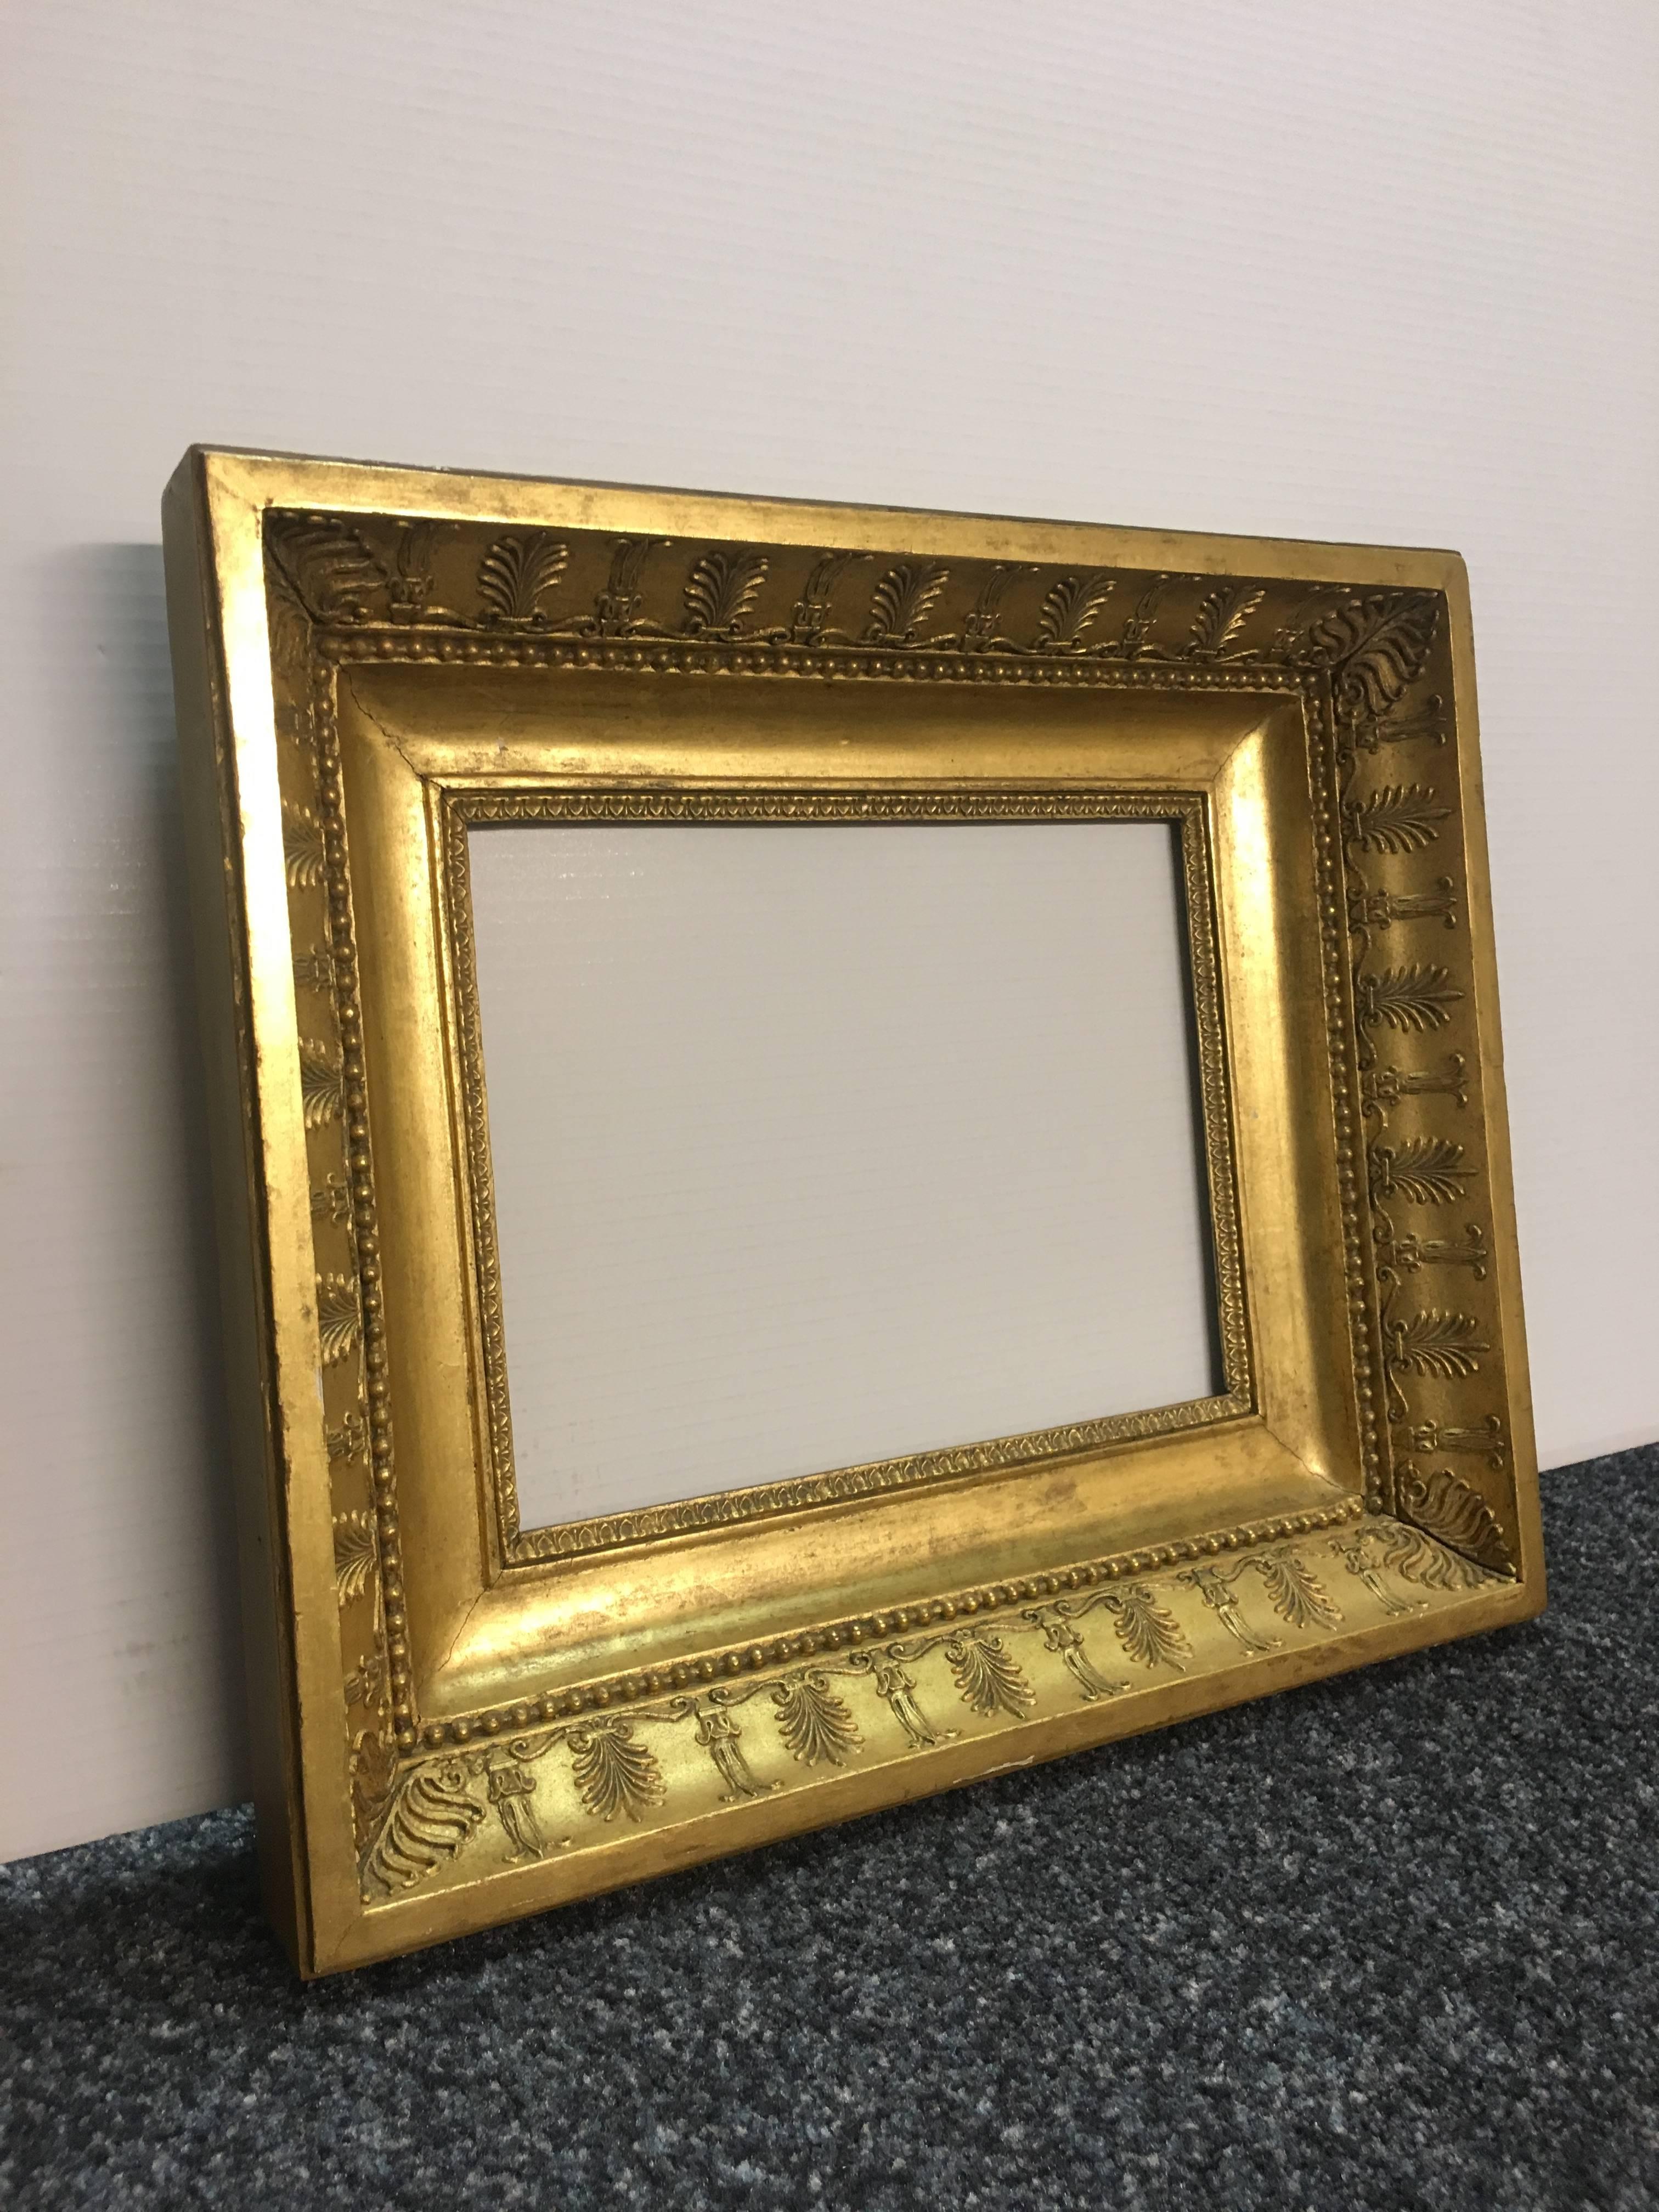 Late 19th Century Italian Neoclassical Wood Frame with Gold Leaf Cover For Sale 3